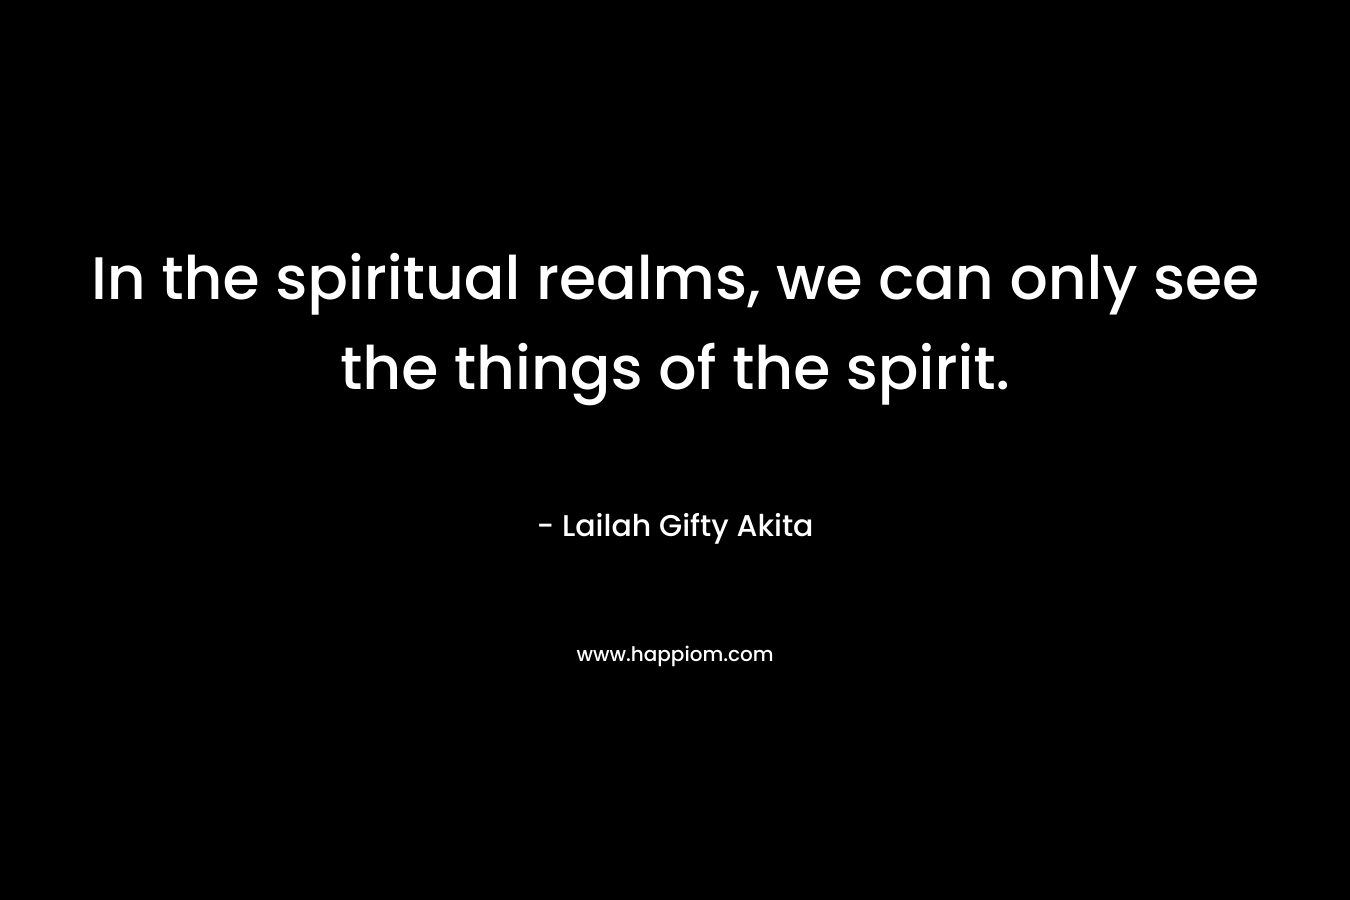 In the spiritual realms, we can only see the things of the spirit. – Lailah Gifty Akita